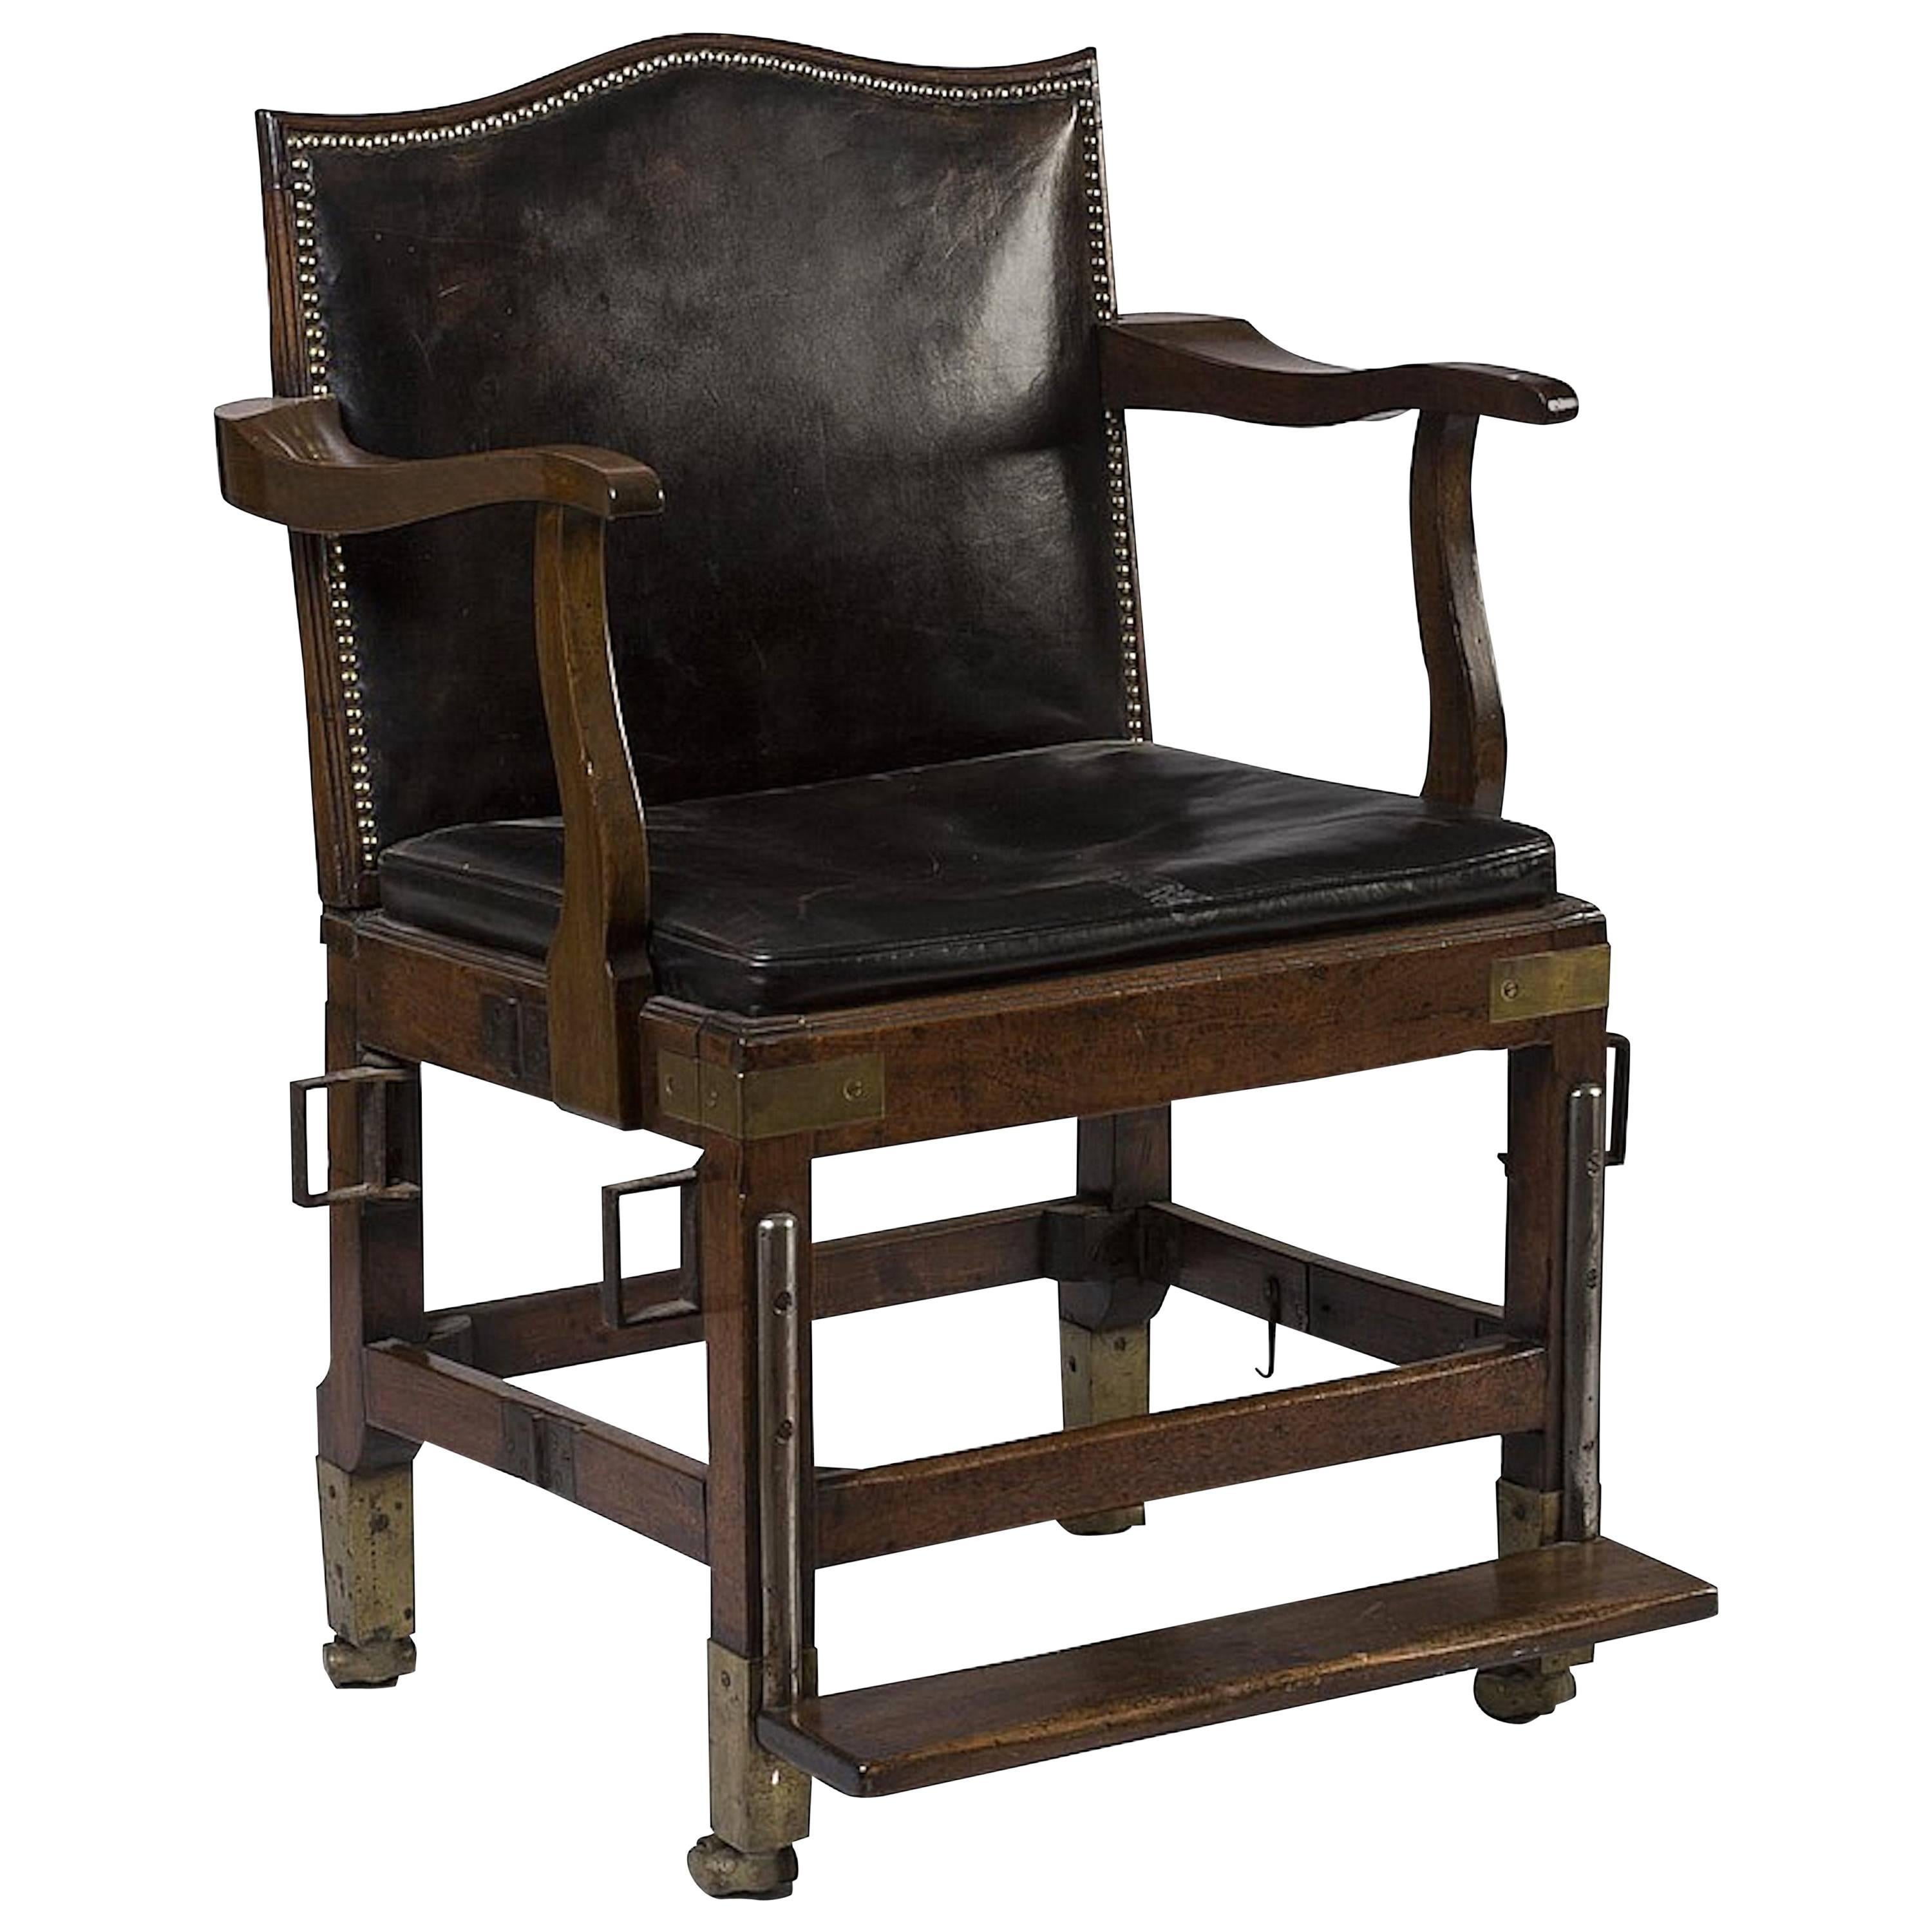 British Campaign Folding Chair Walnut Brass and Leather